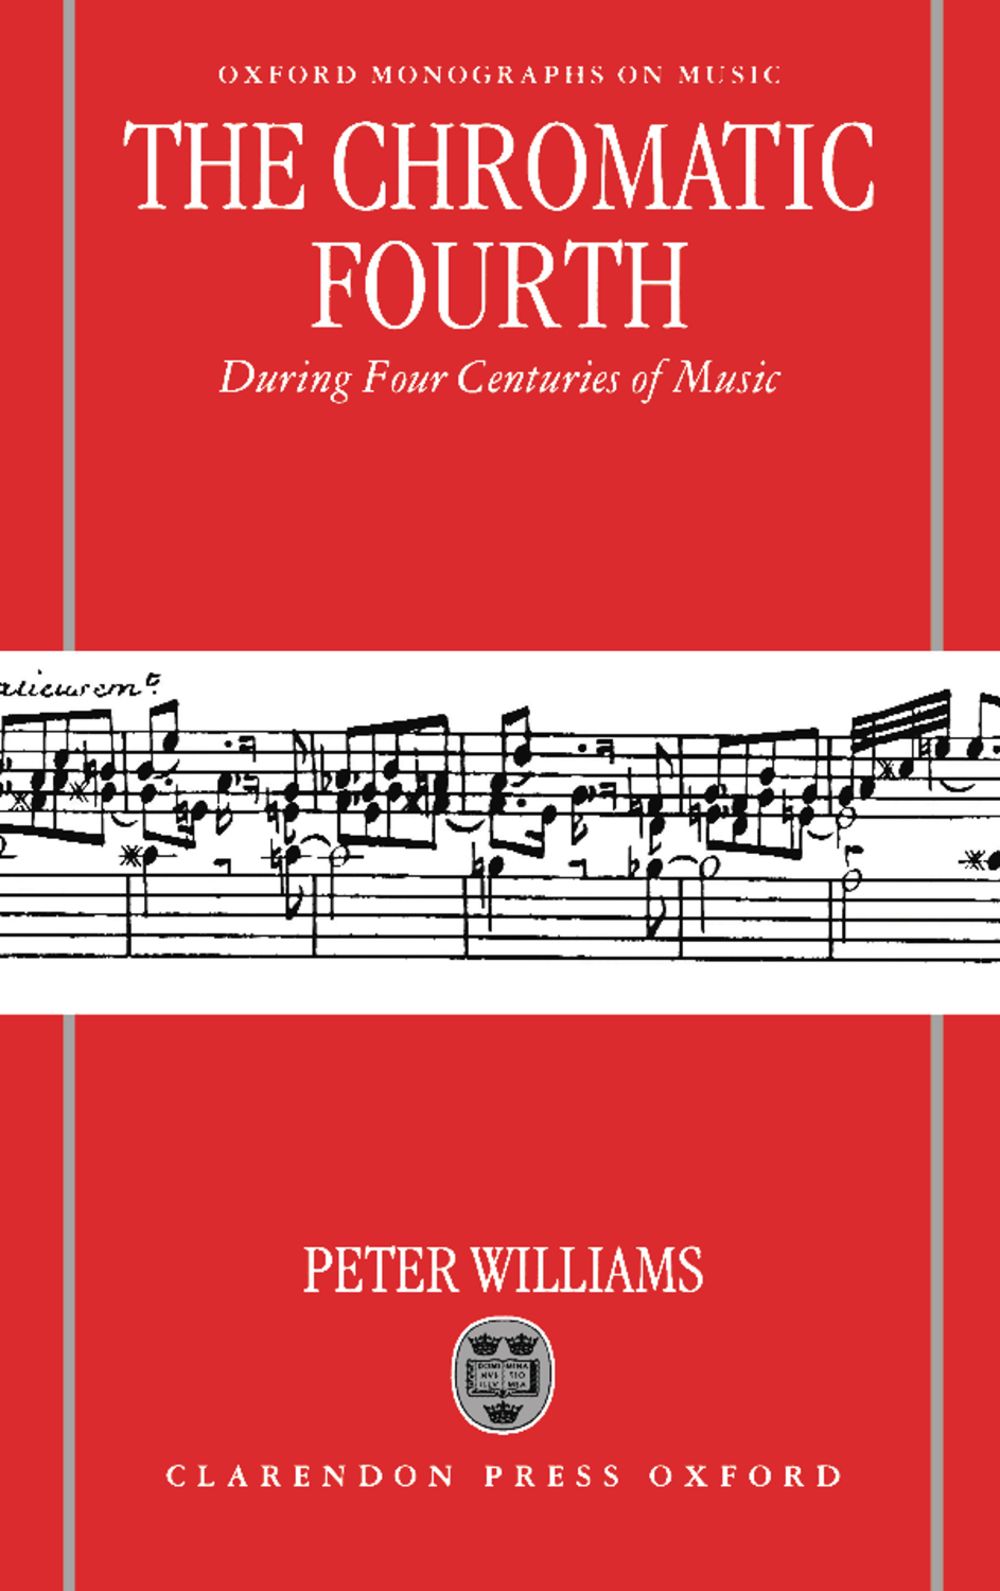 Chromatic Fourth During Four Centuries of Music